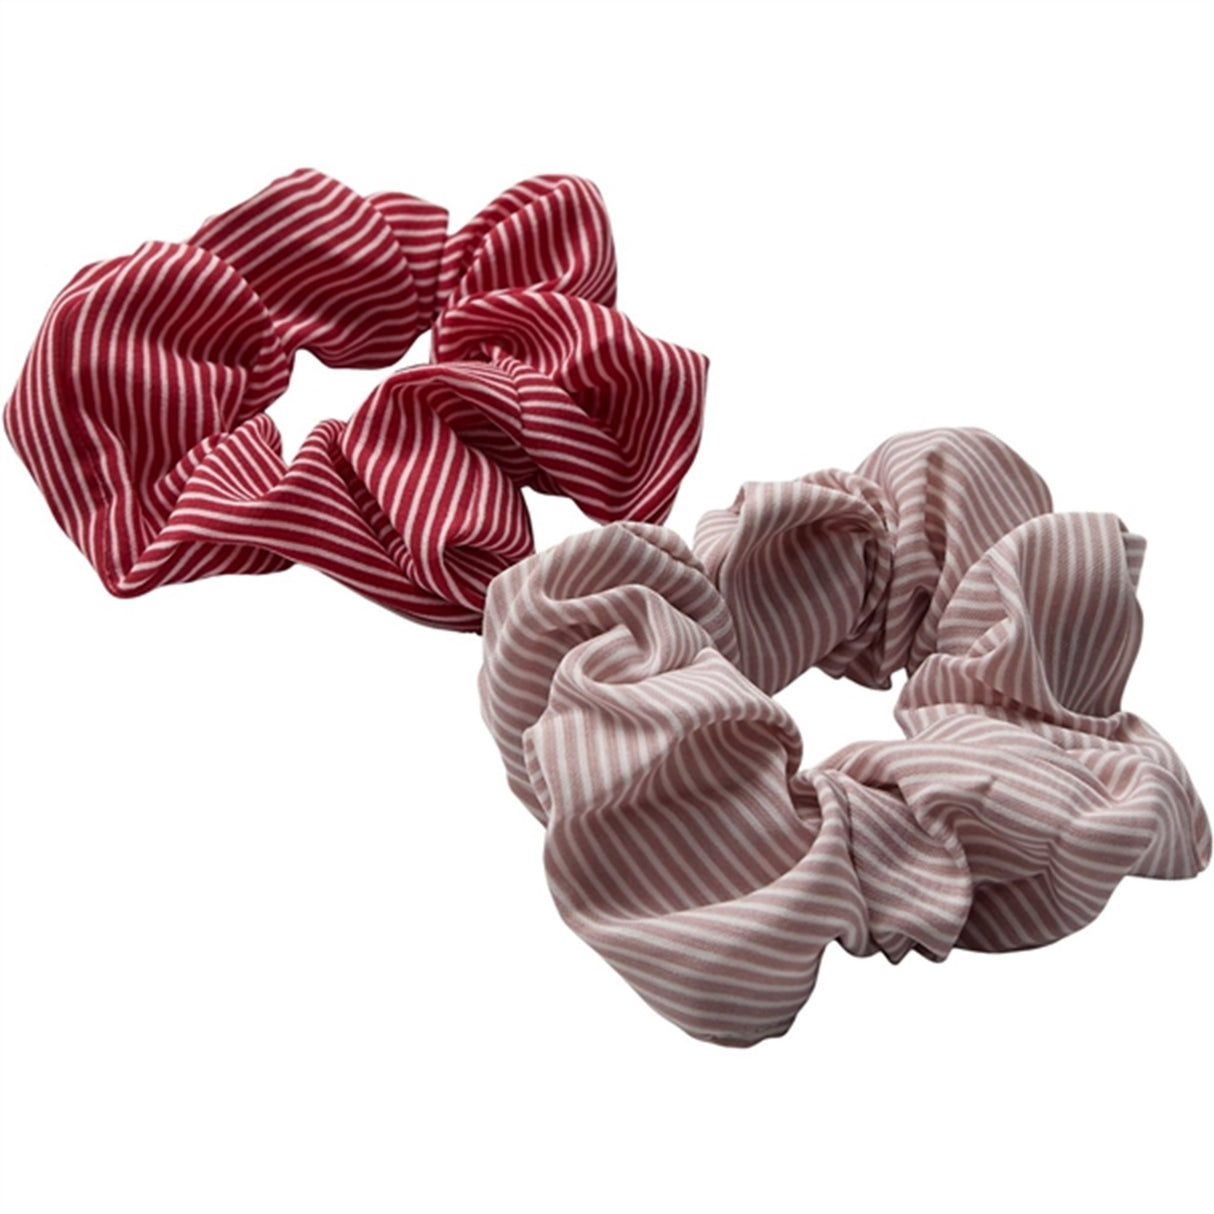 Sofie Schnoor Comb. Red/ Rose Striped Hair Clip 2-Pcs 3